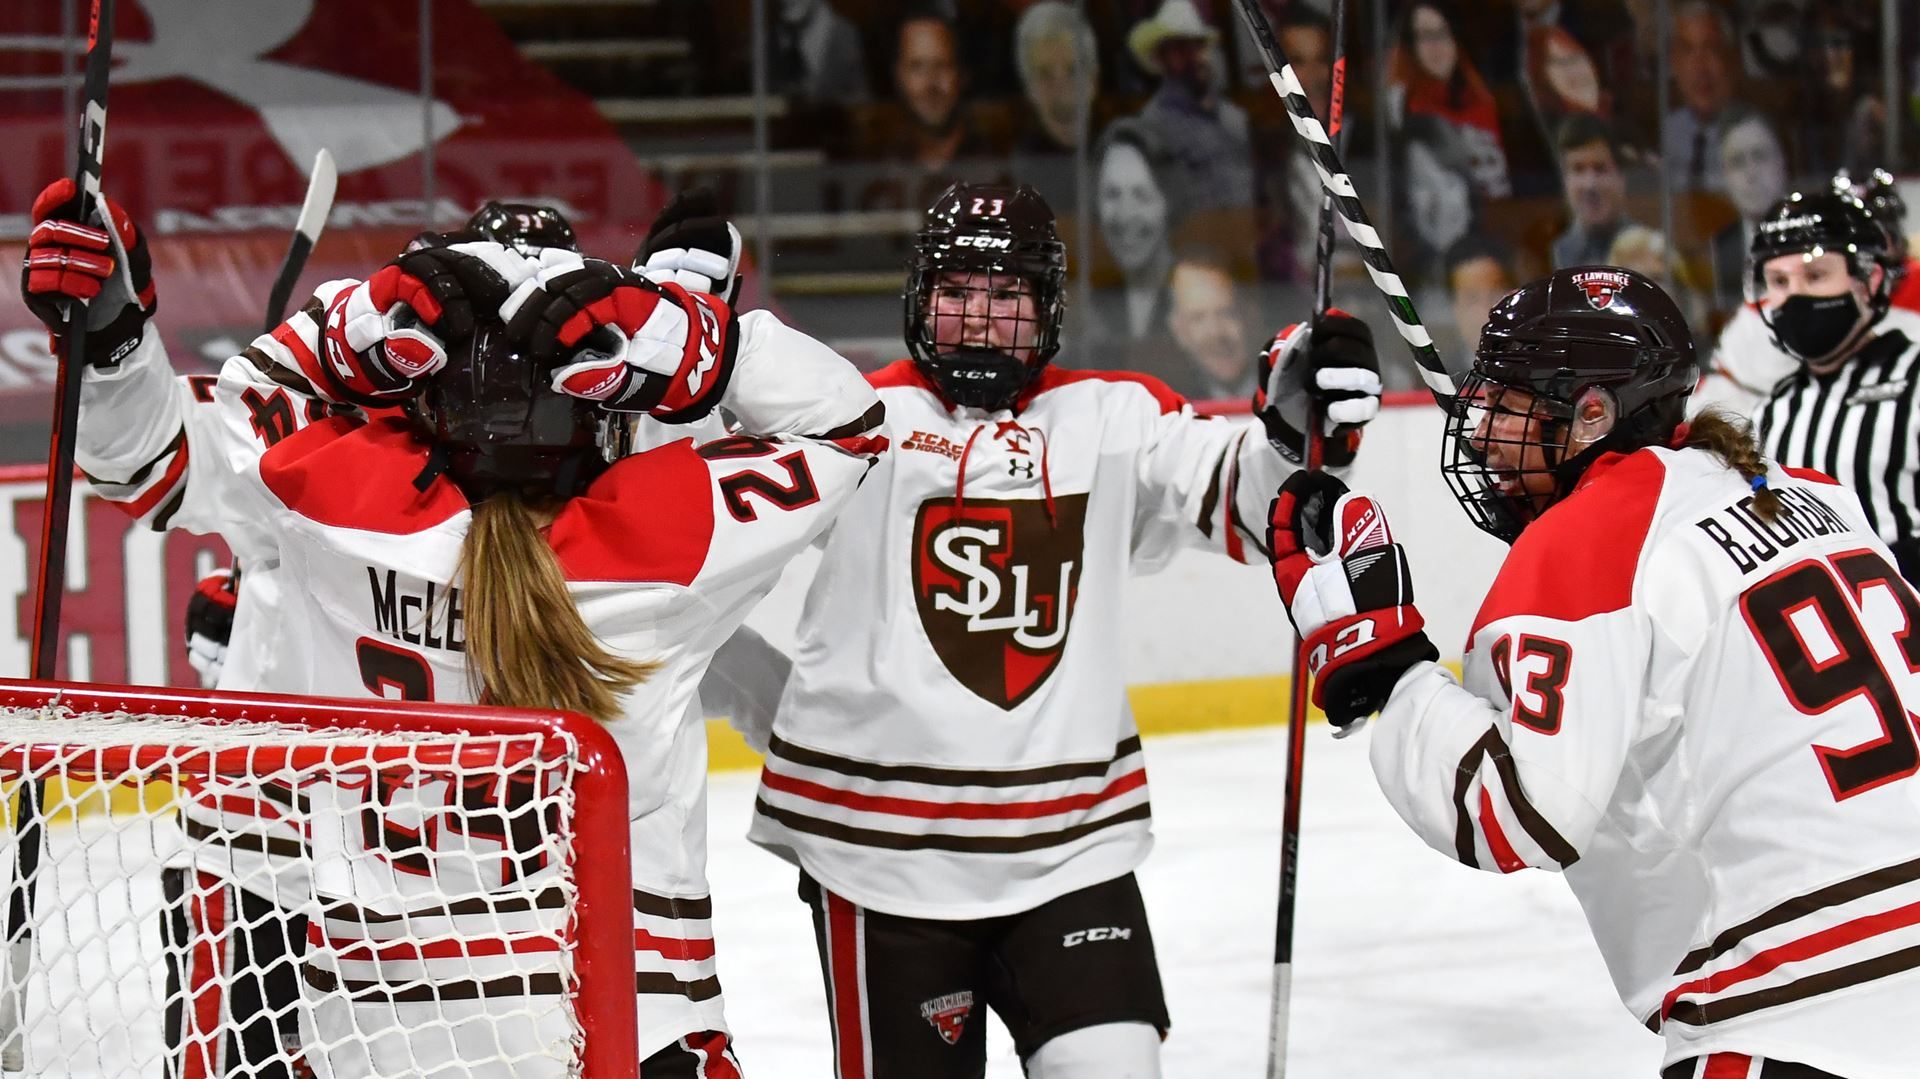 NCAA Women's Hockey: What to Watch, WCHA Semifinals, CHA and Hockey East finals